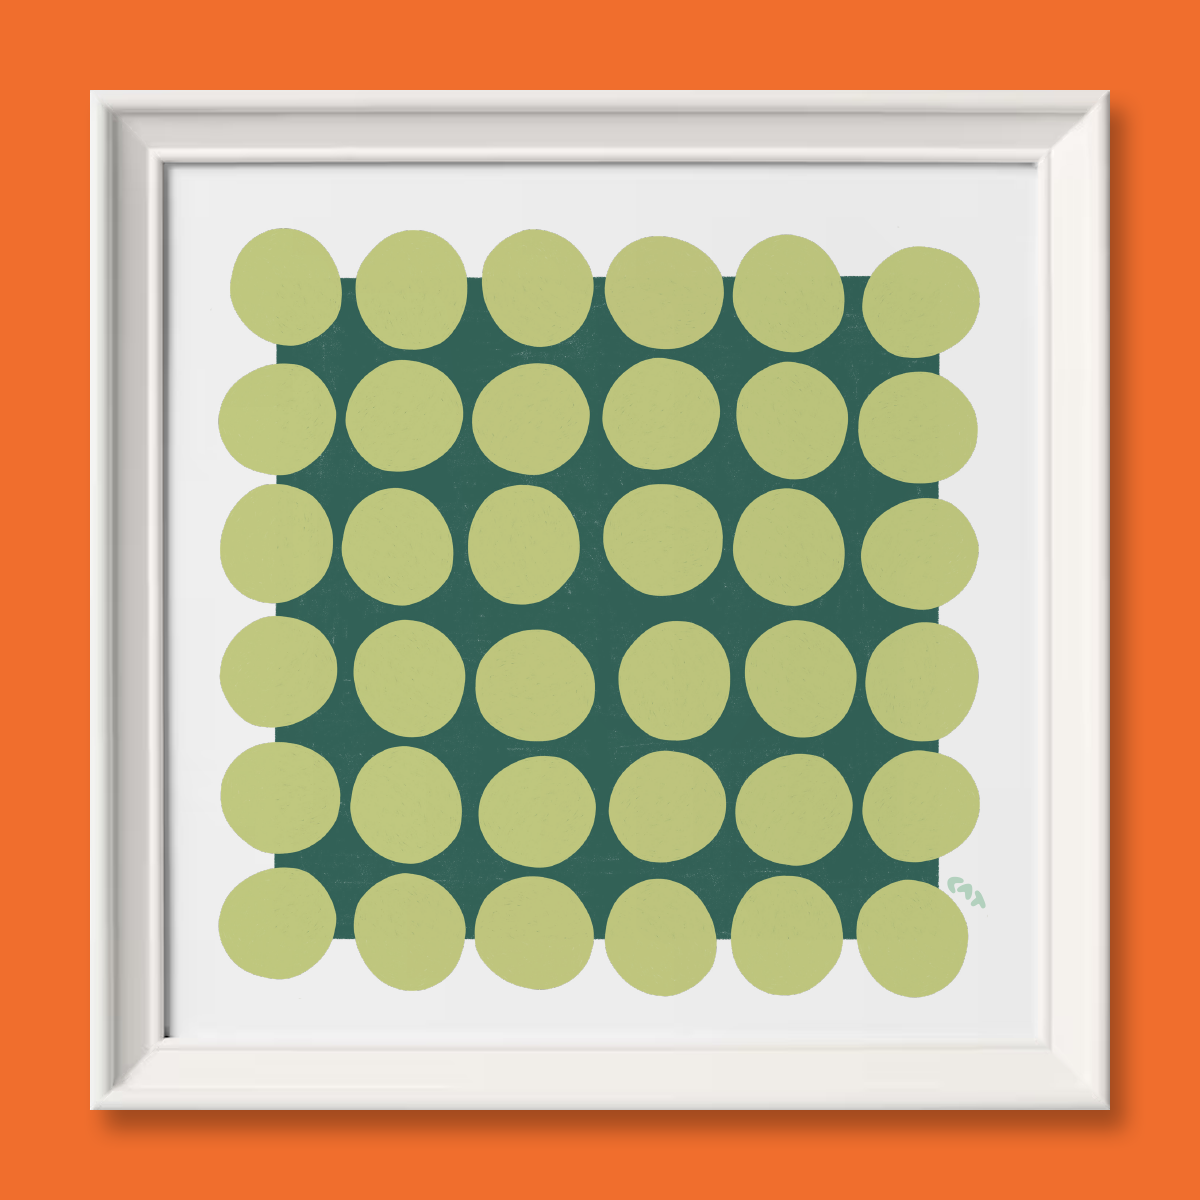 White framed print of a dark green square with a grid of light green polka dots on top.